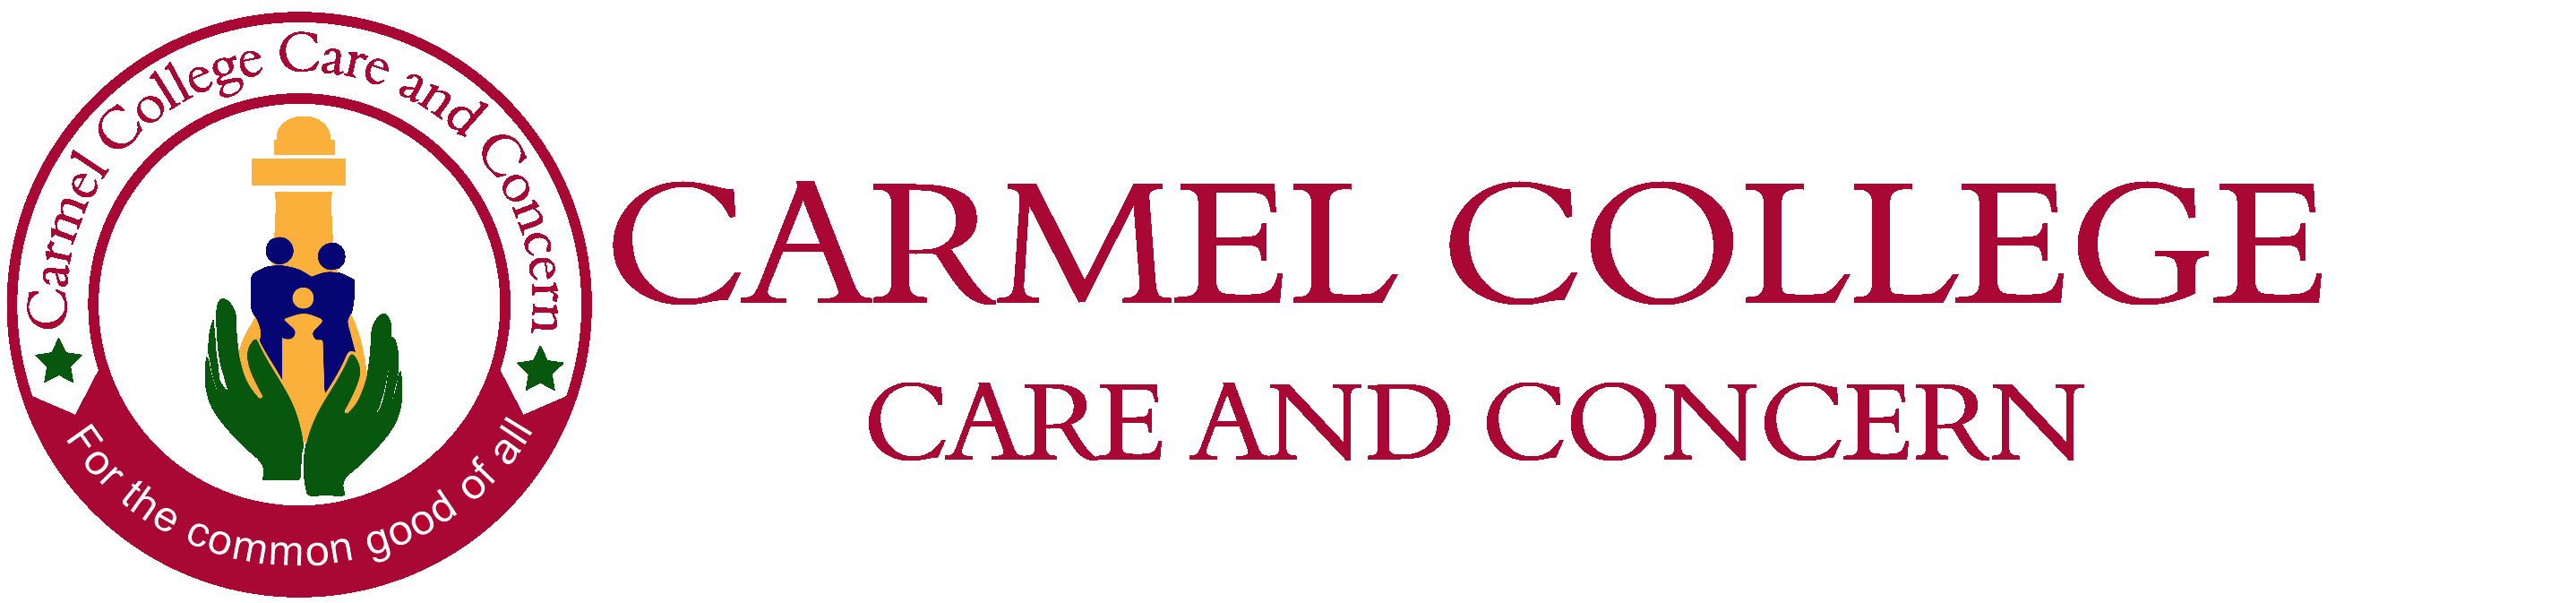 Care and concern logo.PNG